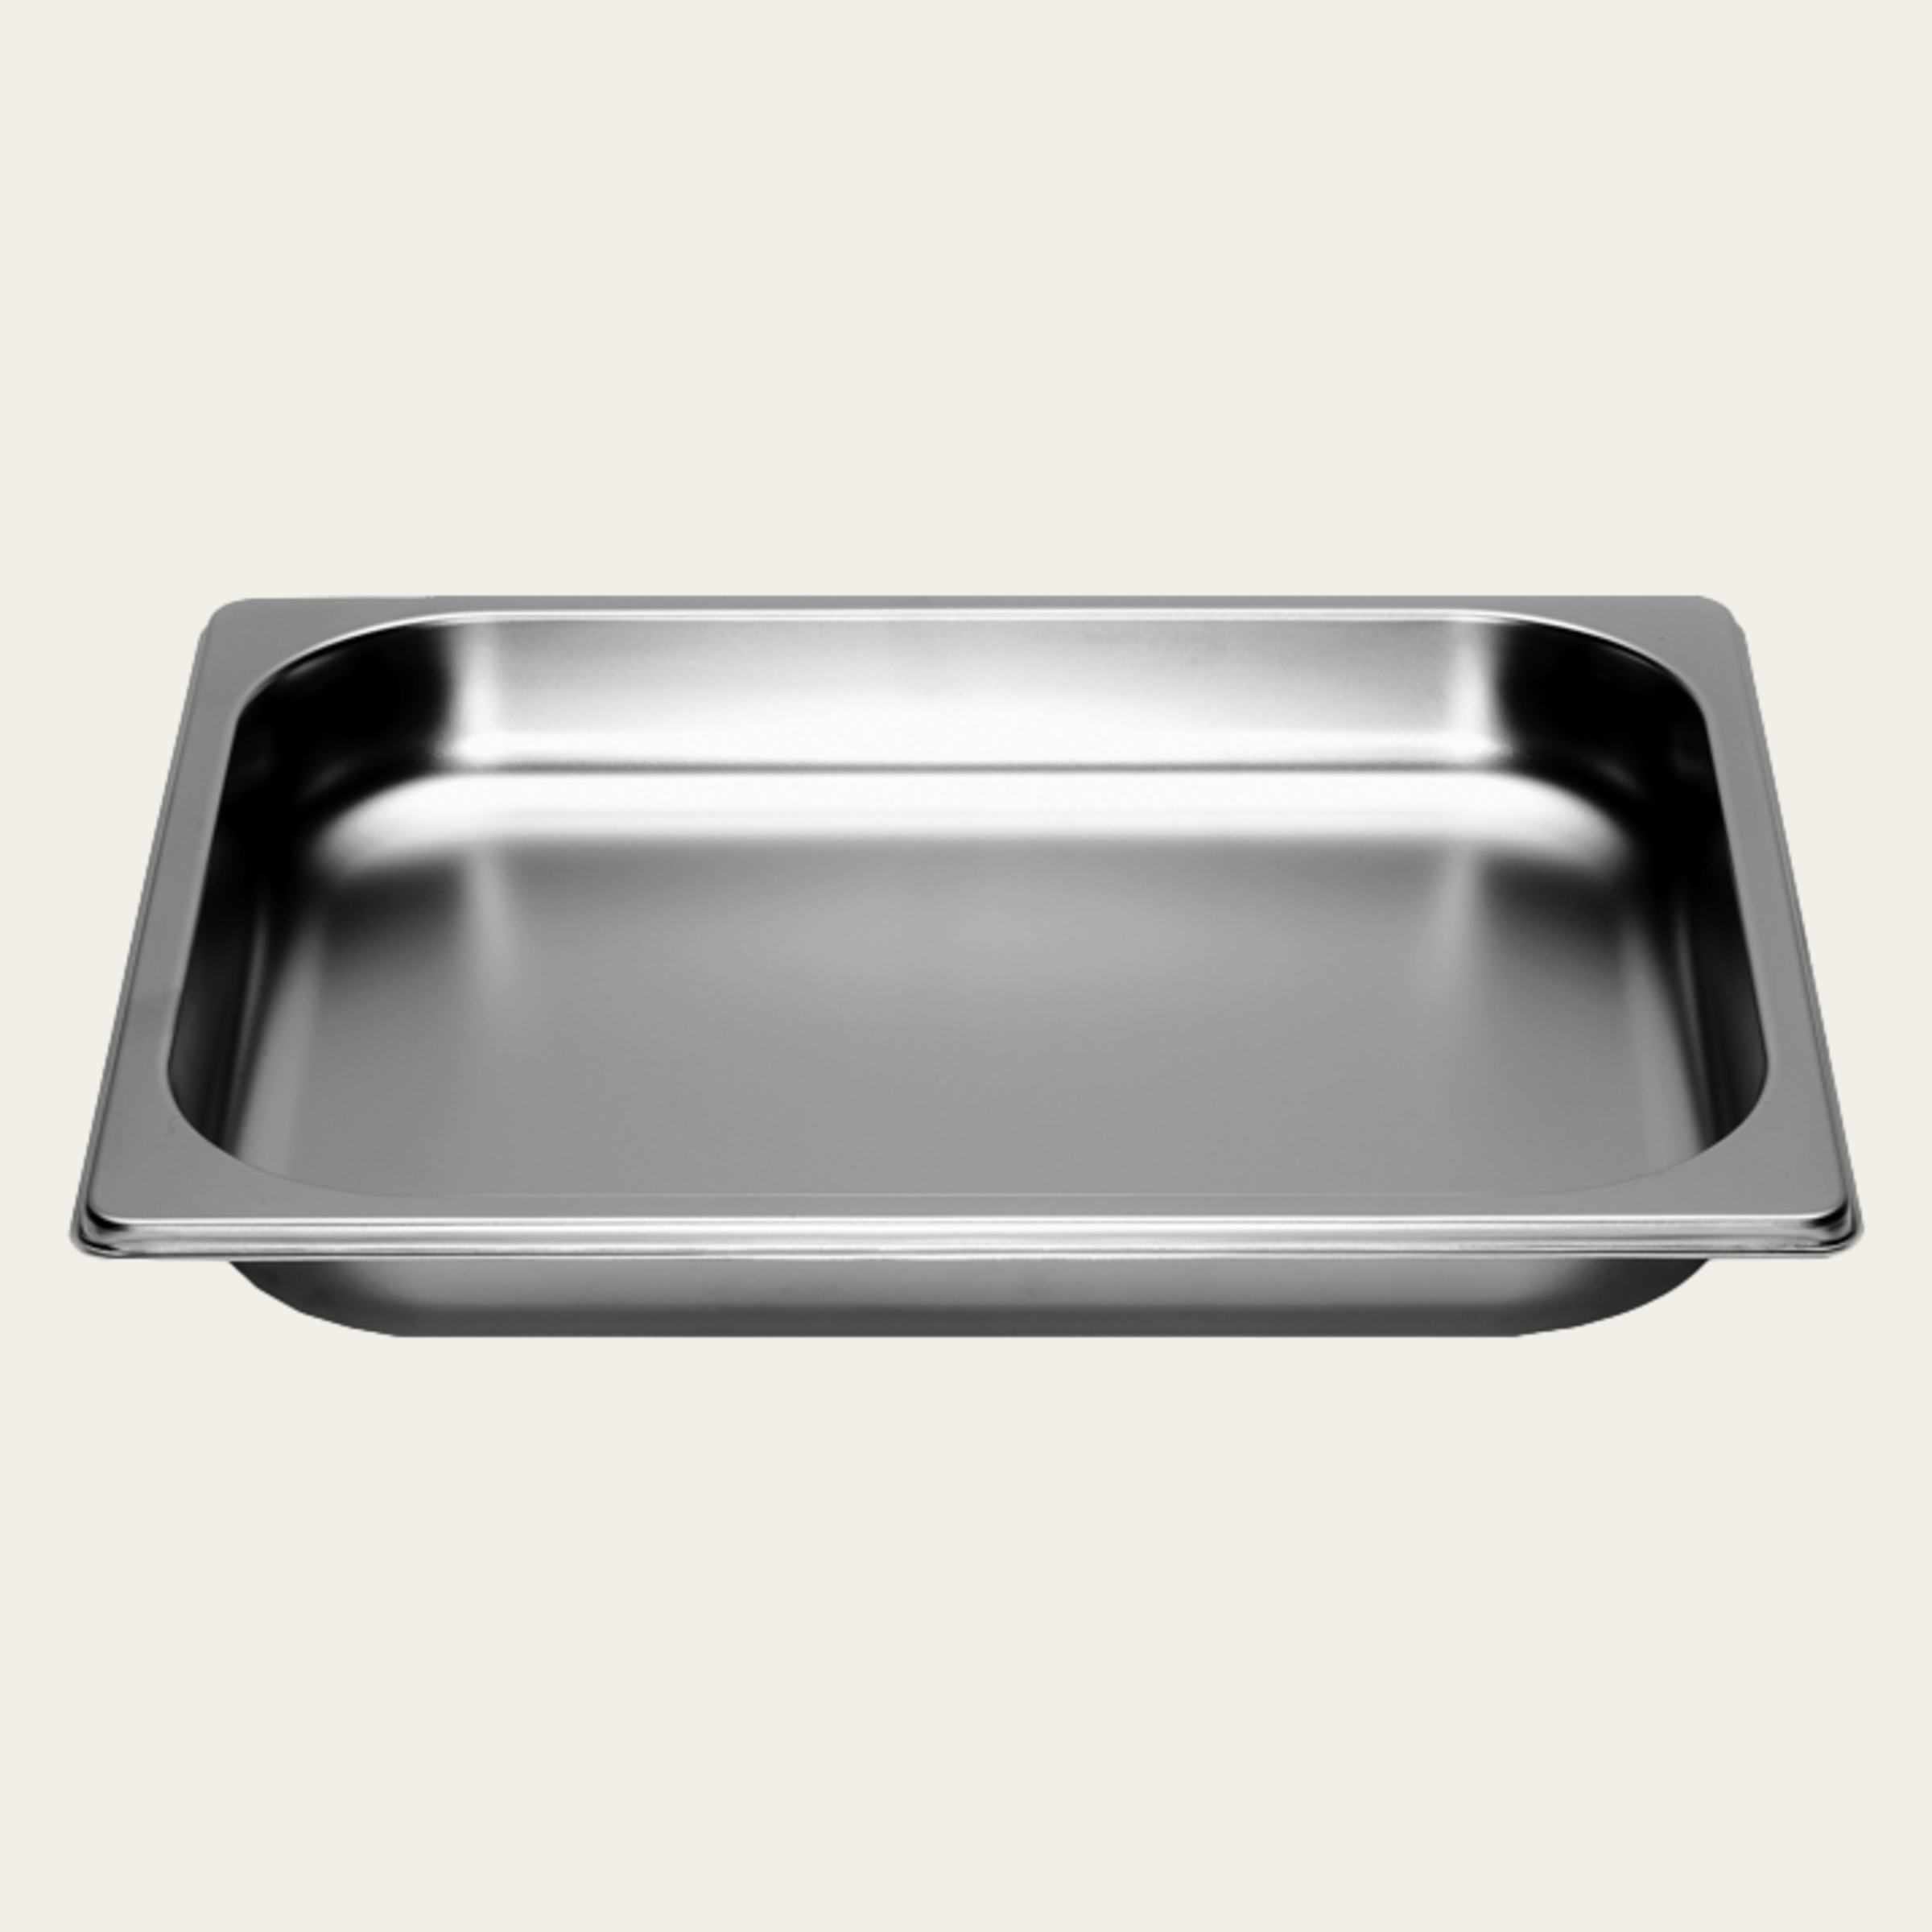 Cooking tray unperforated, 1/2 GN, W 325 x D 265 x H 40 mm